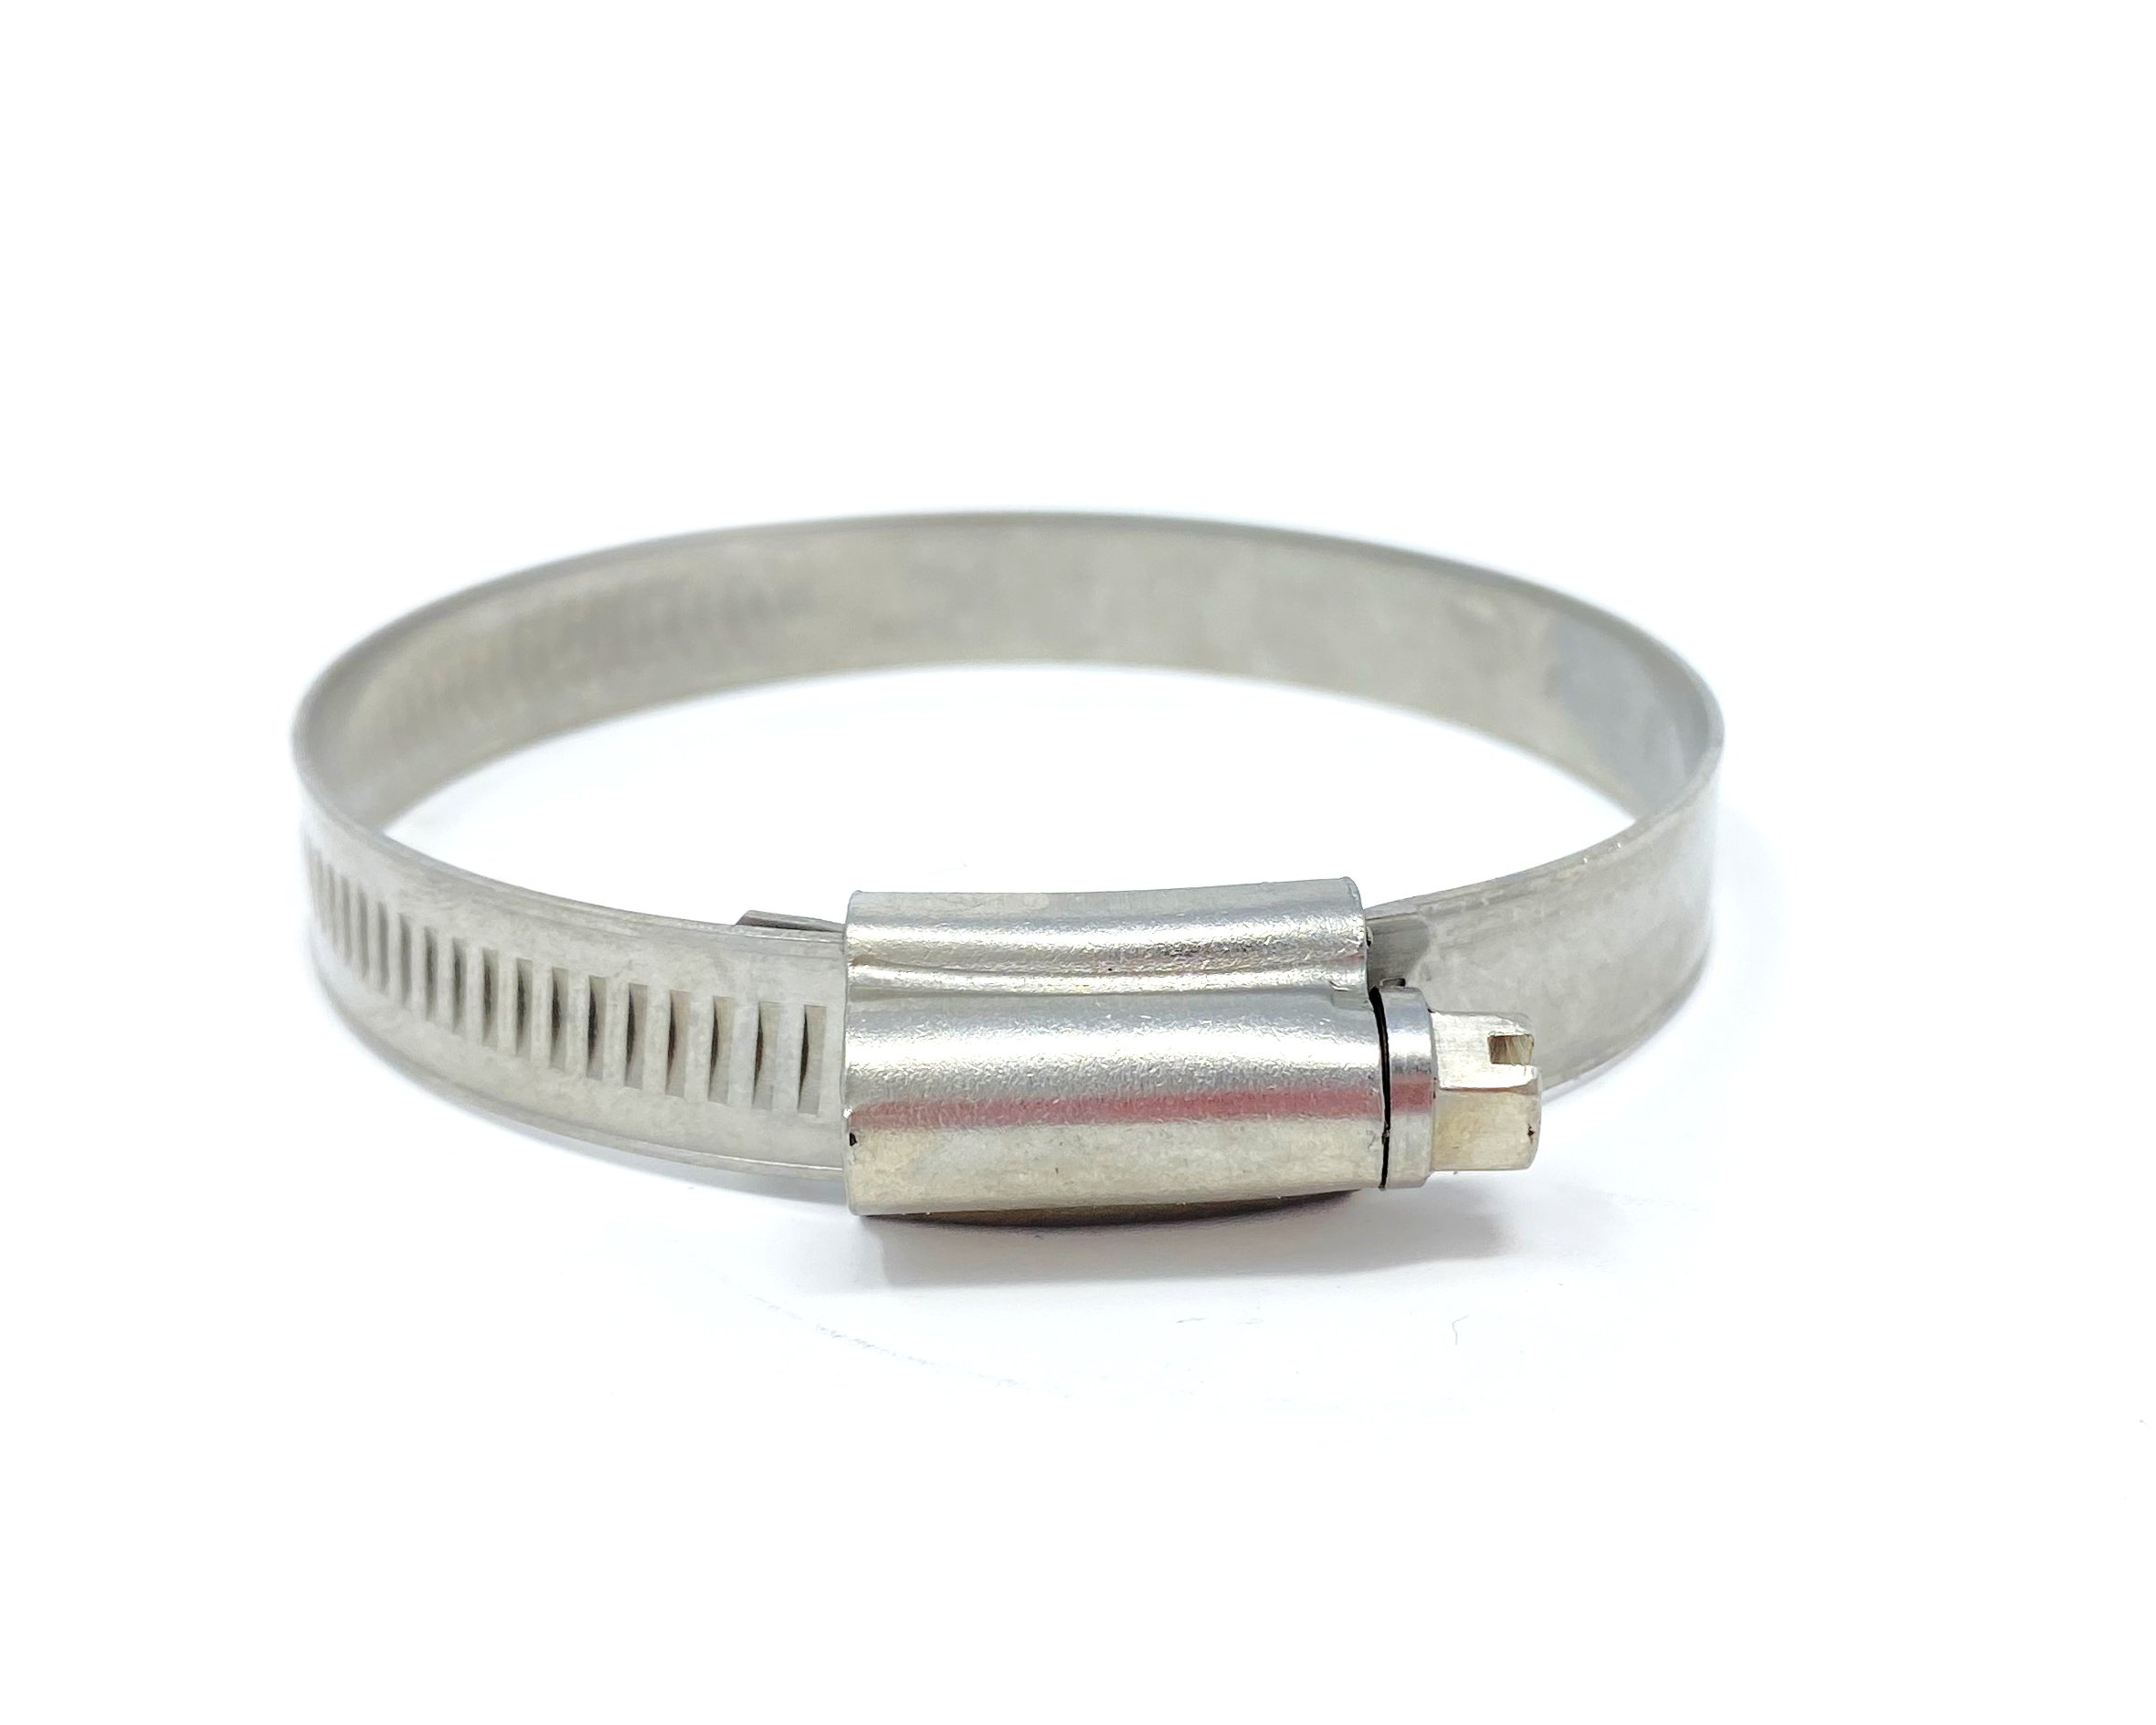 LOX 19-28mm Industrial Stainless Steel Hose Clip W4/304